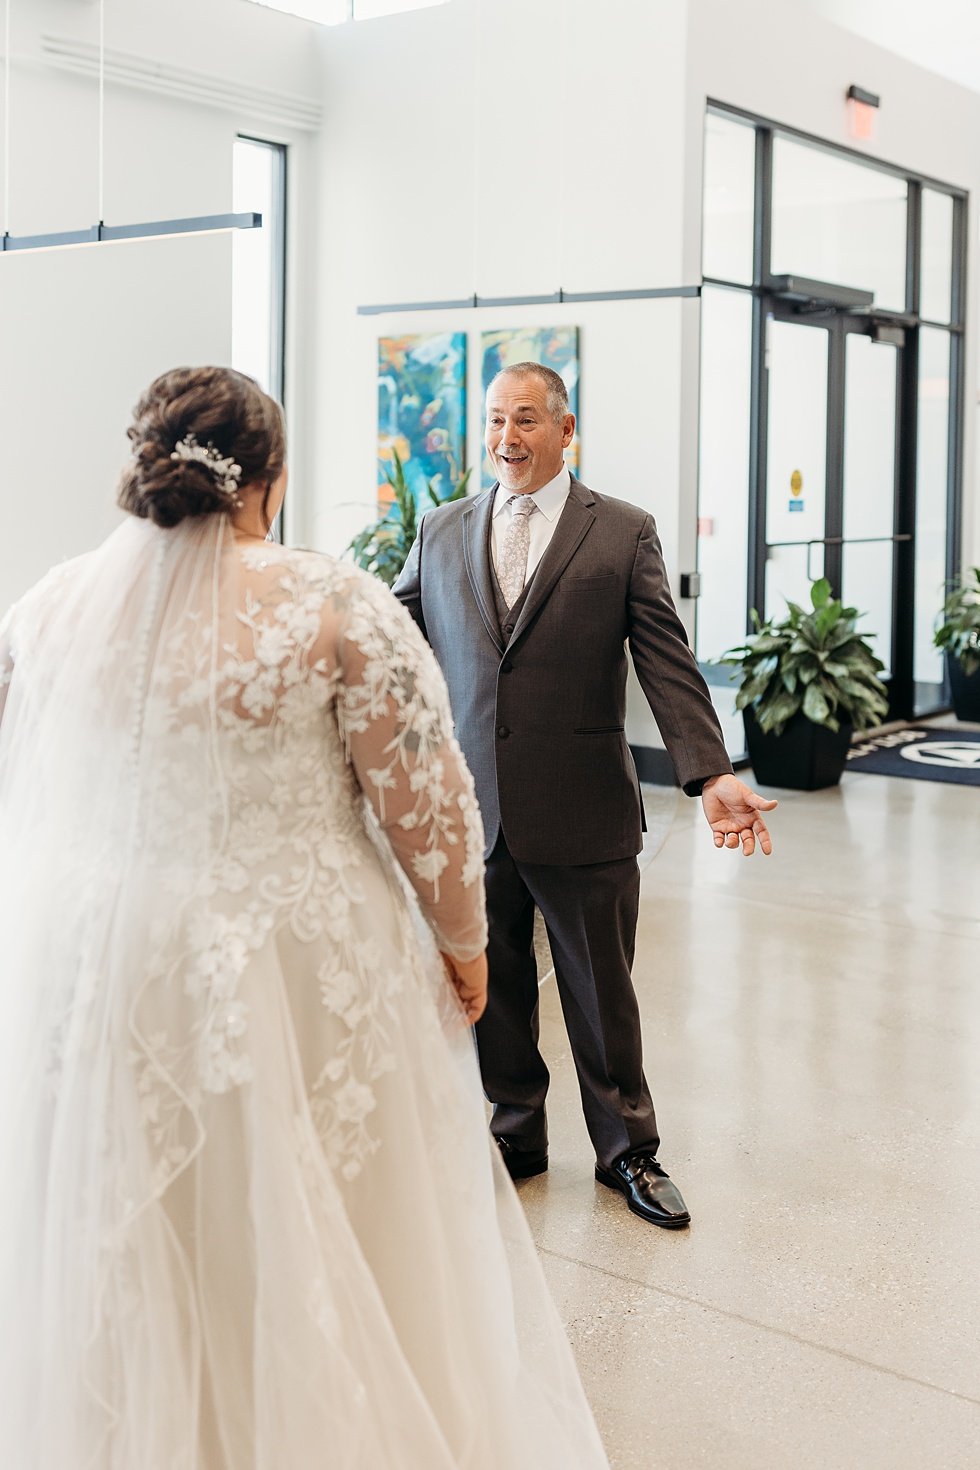  Bride's first look with father. Spring wedding at The Refinery Jeffersonville, Indiana 